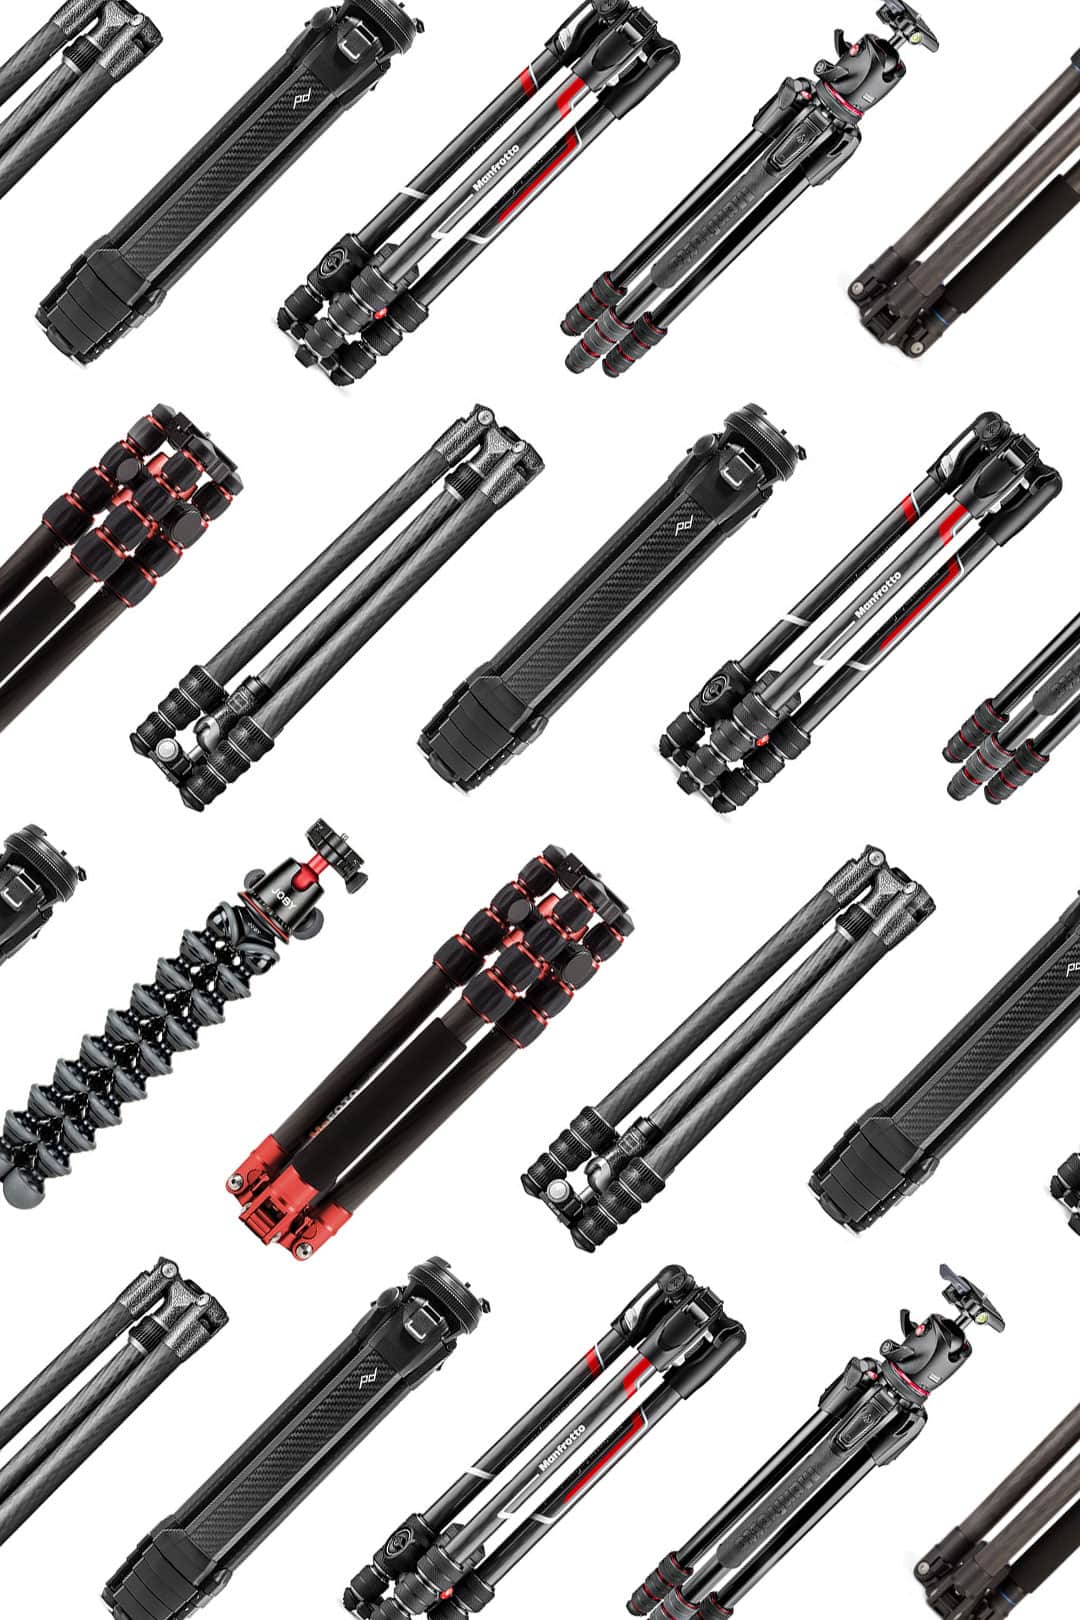 The Best Travel Tripods + Tips On Picking the Best One for You